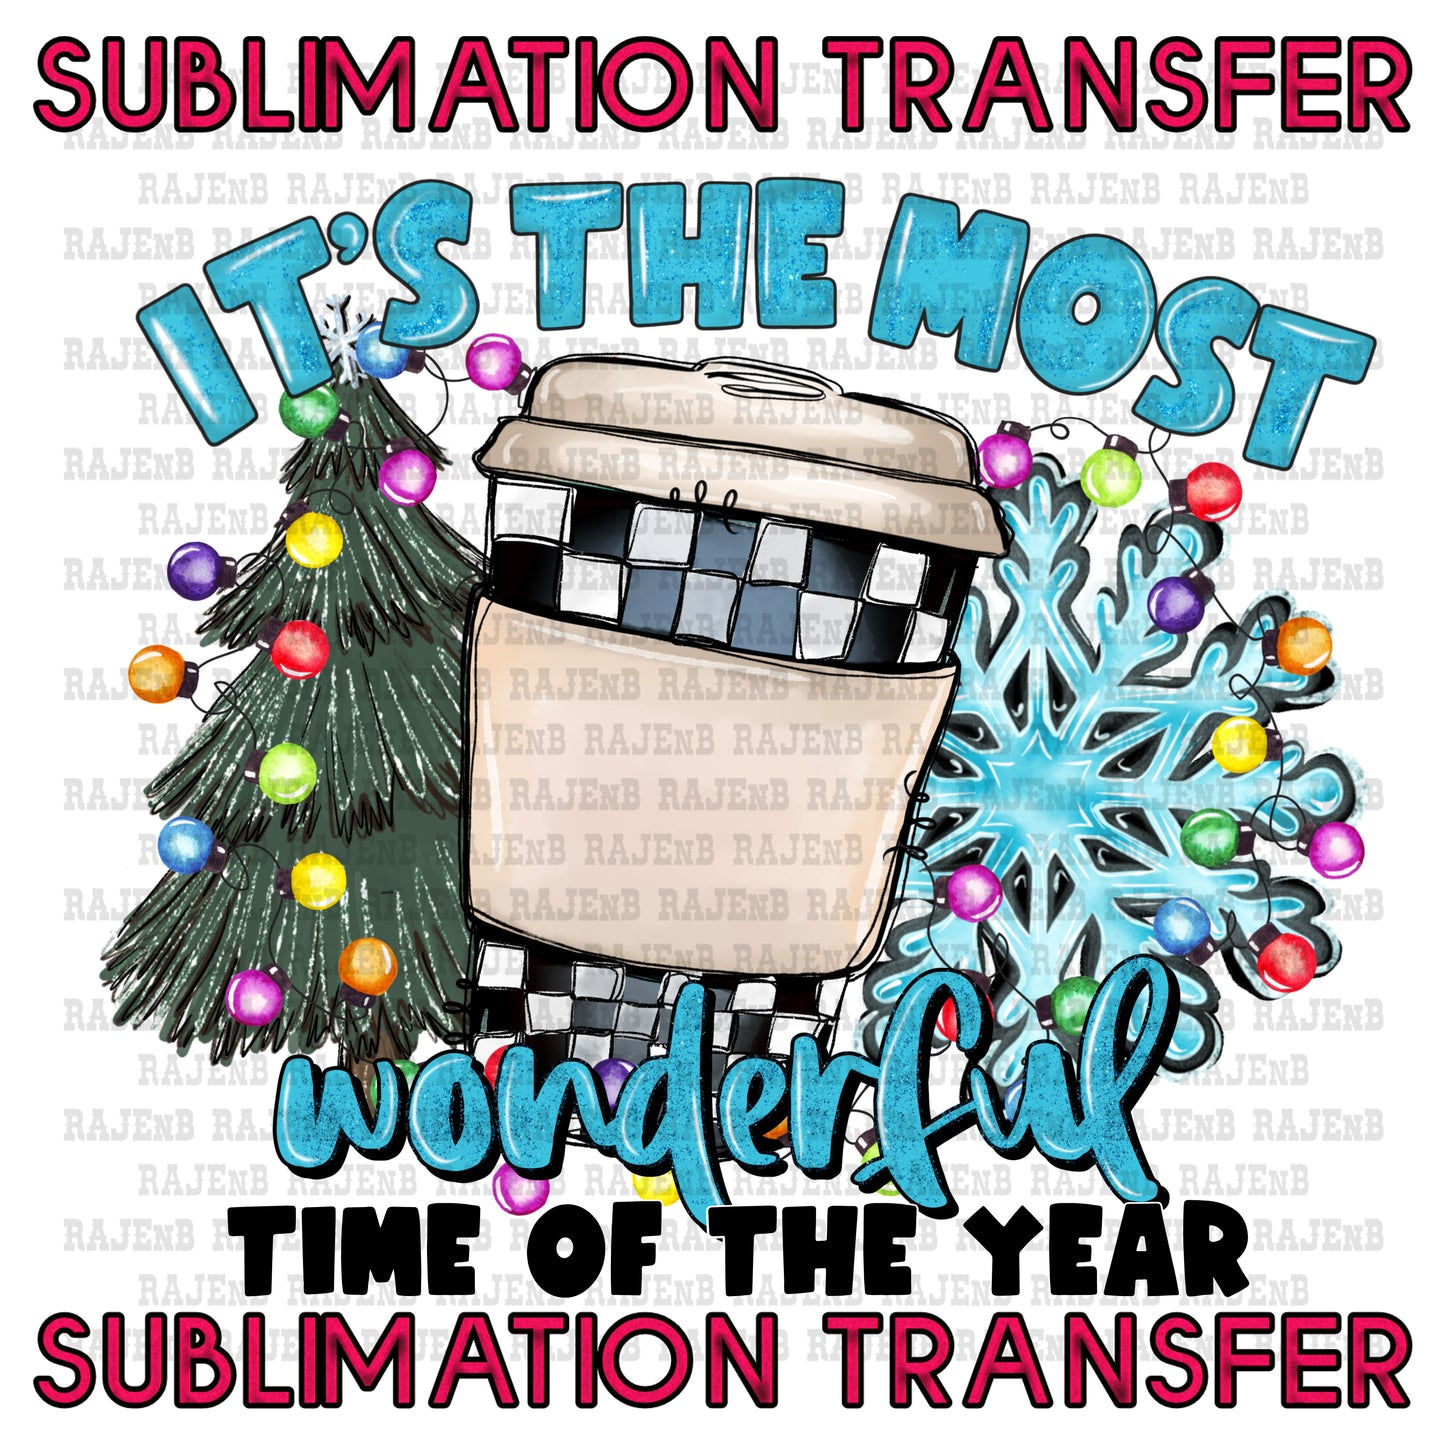 Most Wonderful time of the Year - SUBLIMATION TRANSFER 4143SUB